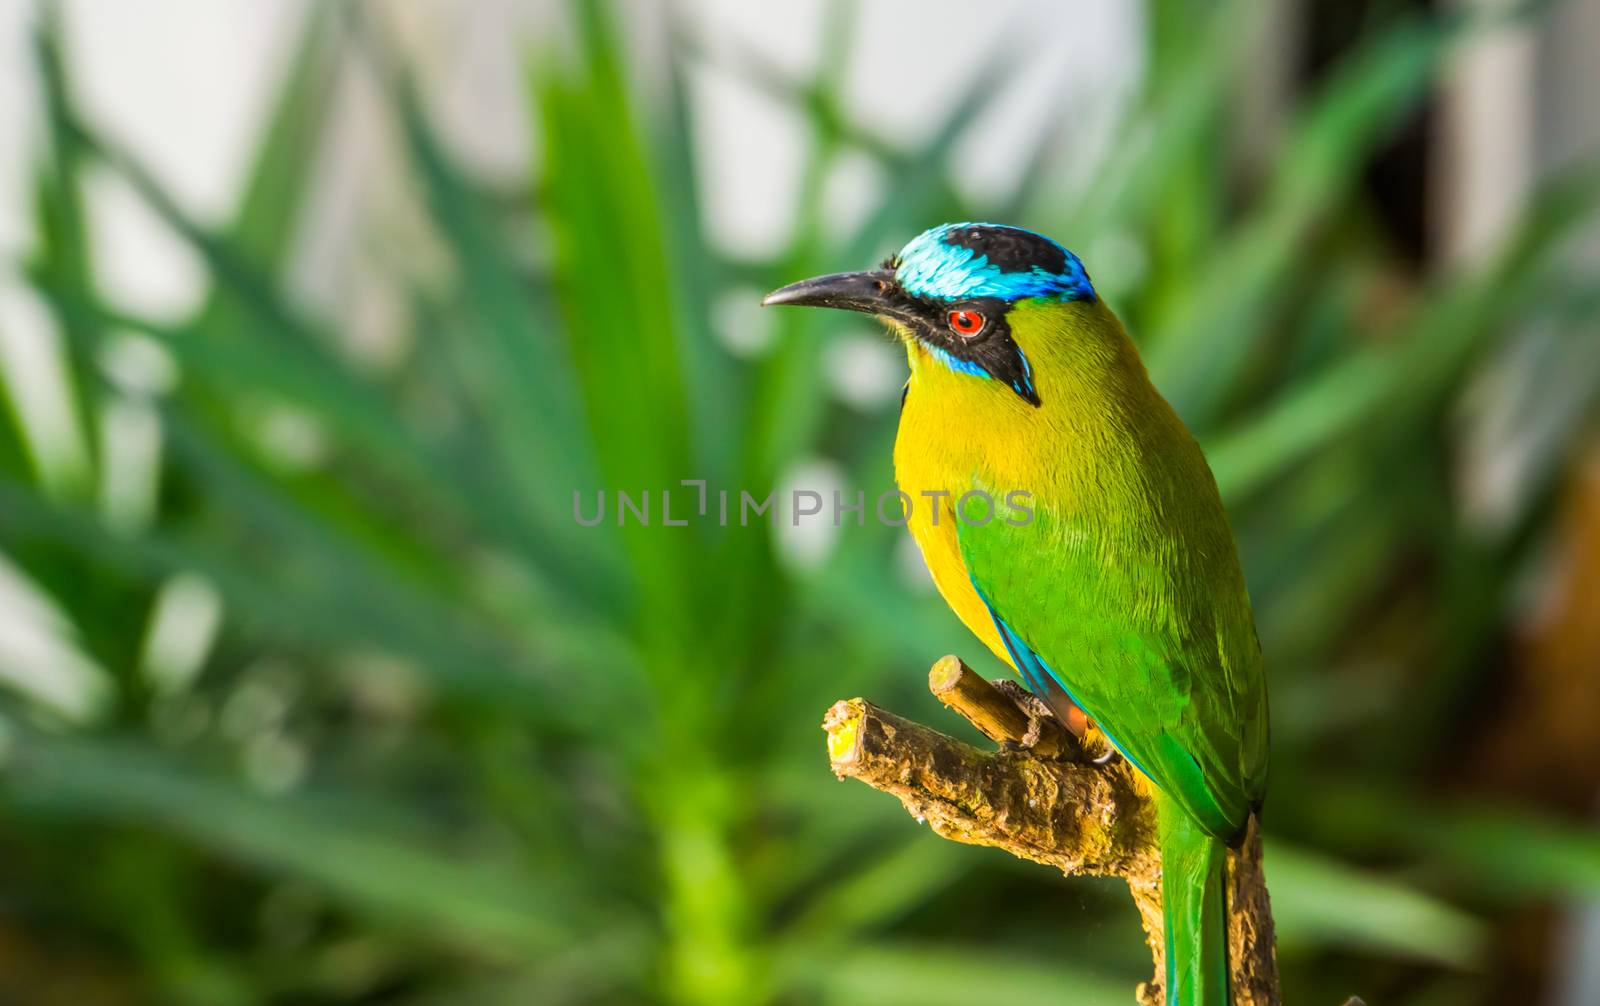 closeup portrait of an amazonian motmot, colorful tropical bird specie from South America